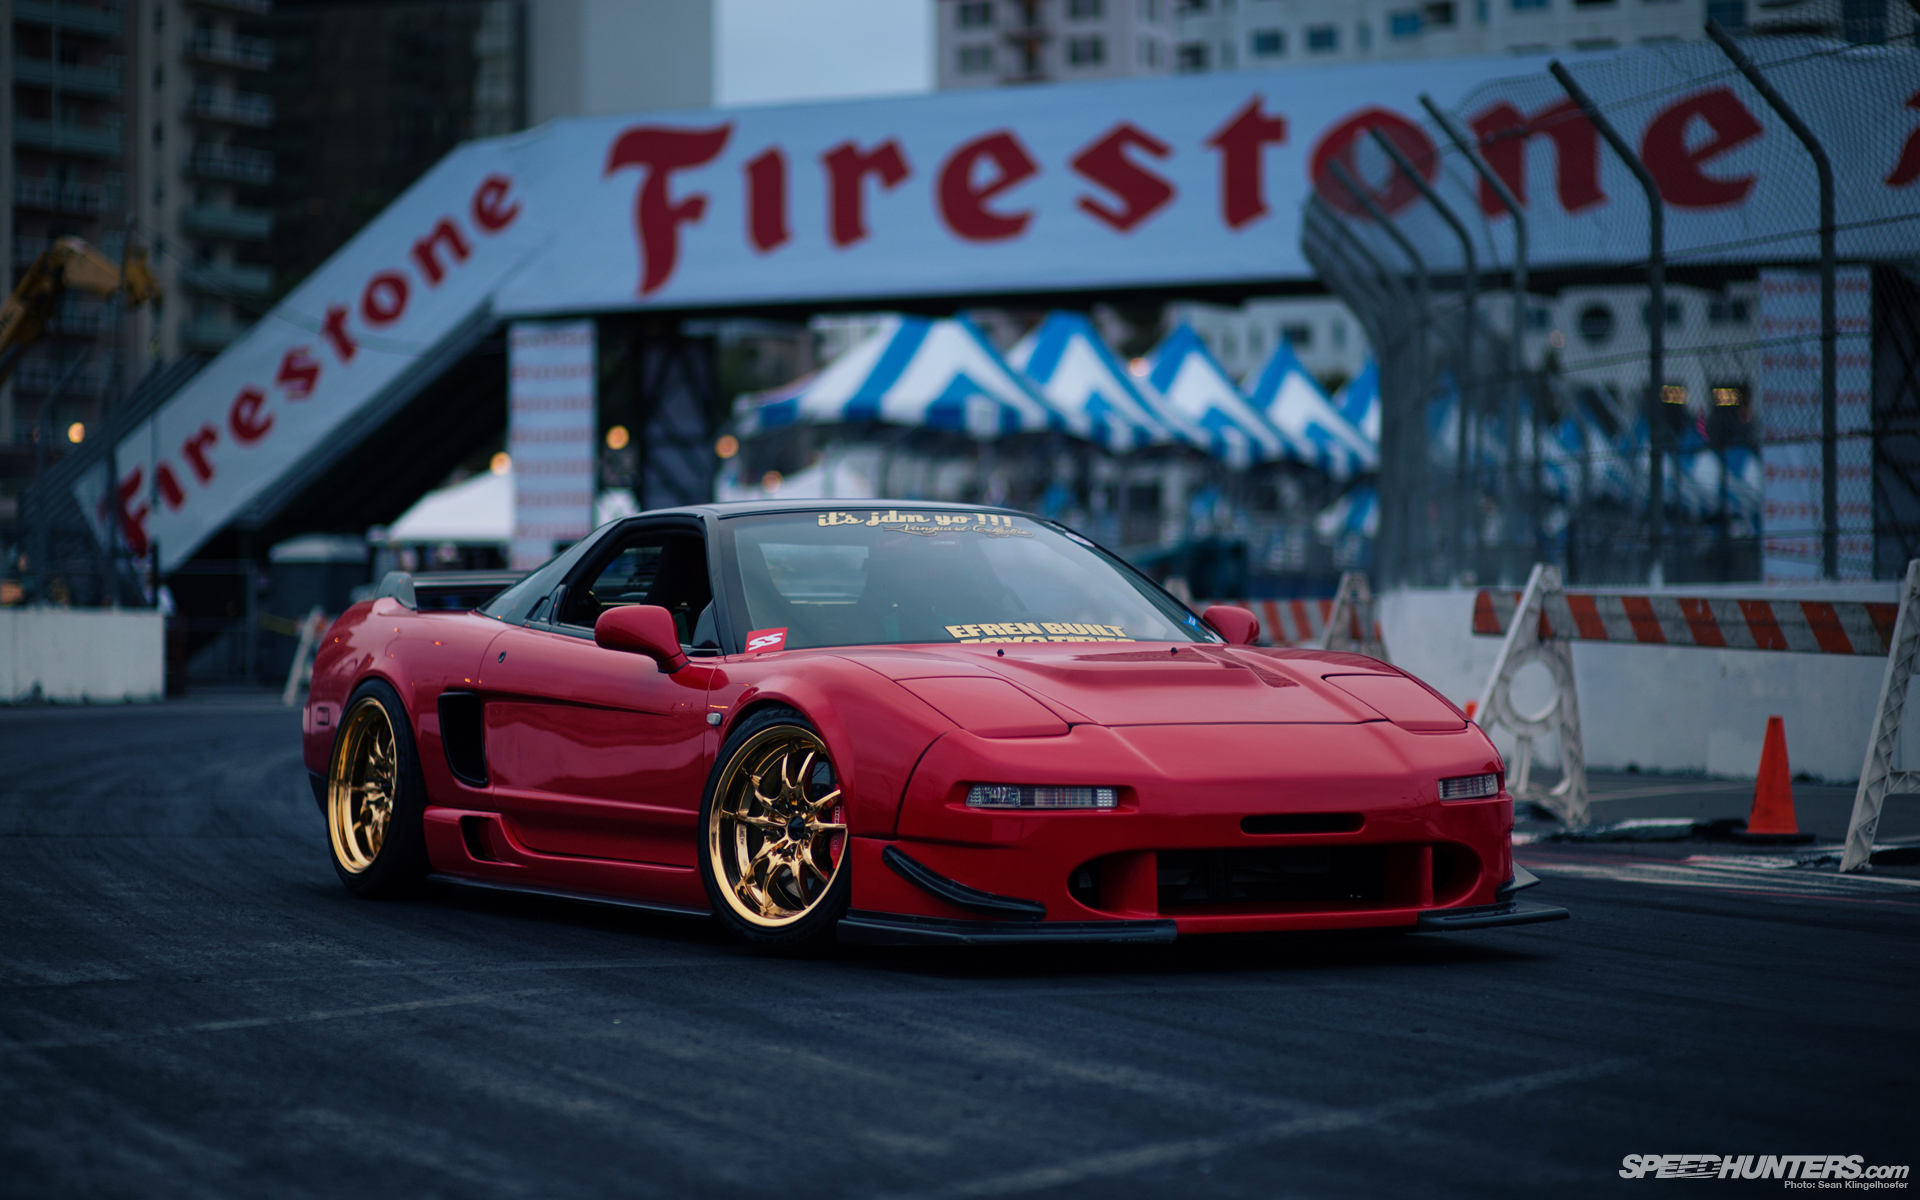 The Dream Car Realized: A Socal Style Nsx - Speedhunters